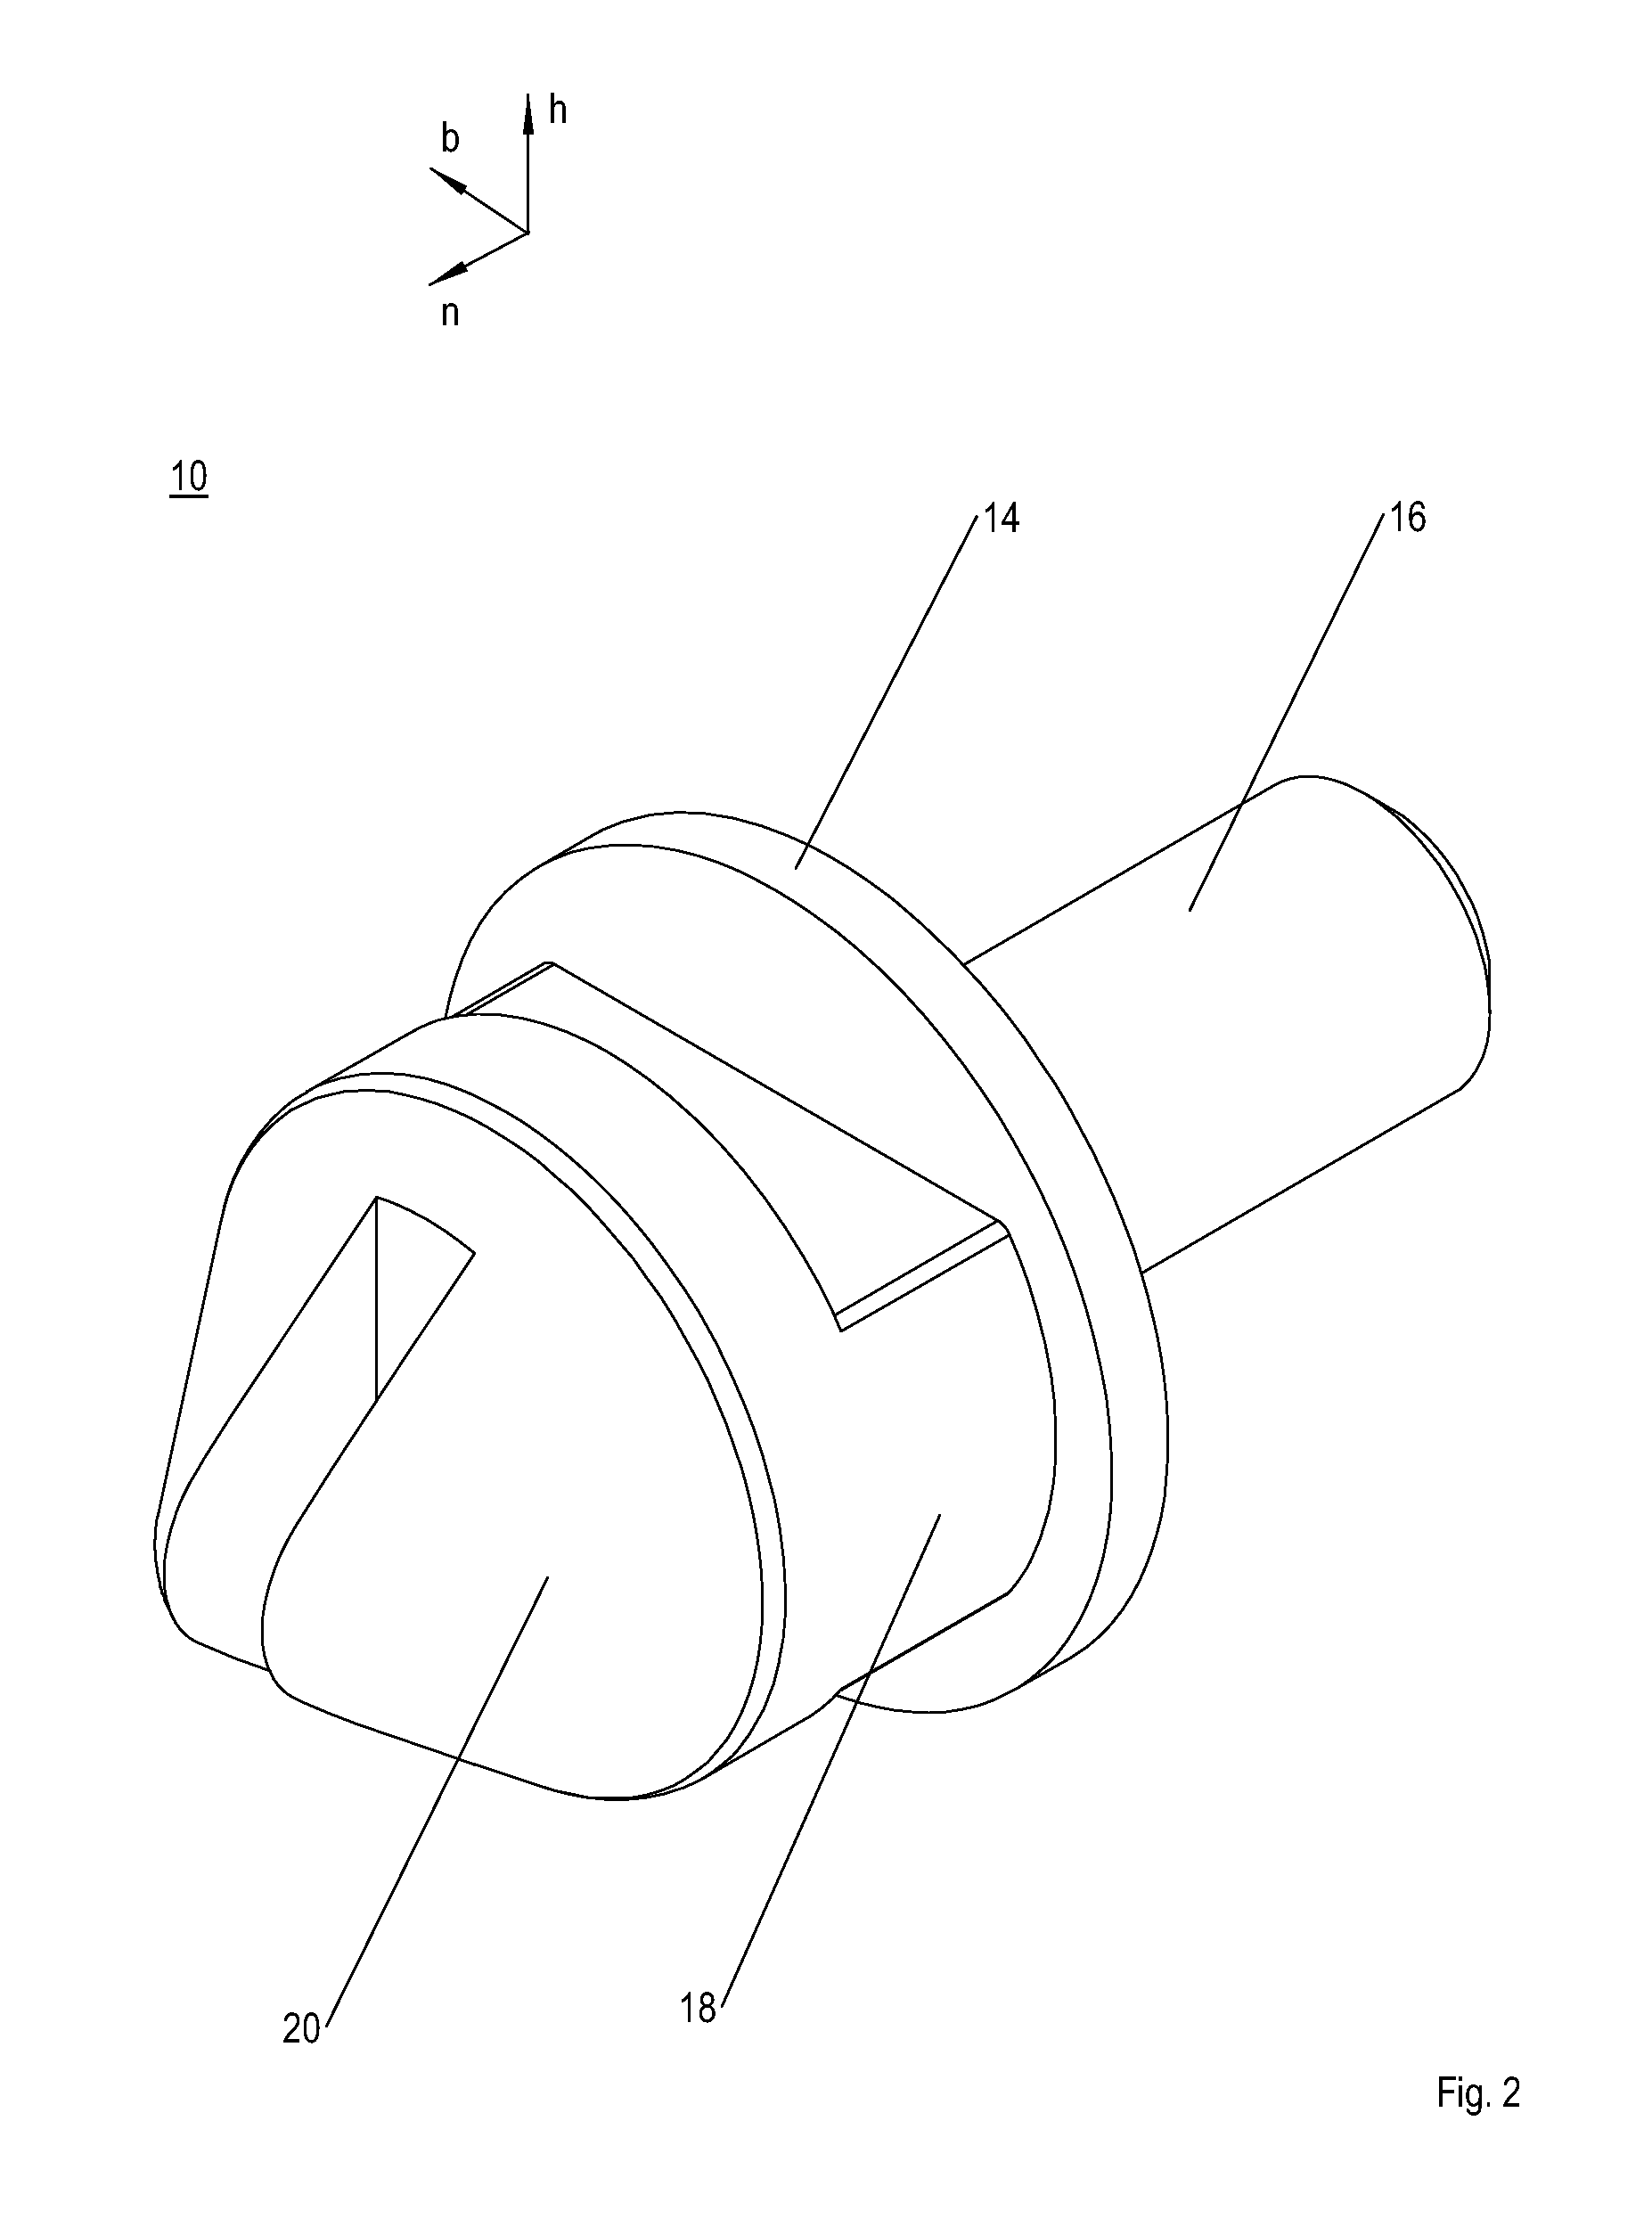 Attachment arrangement, a connecting device, and also a method